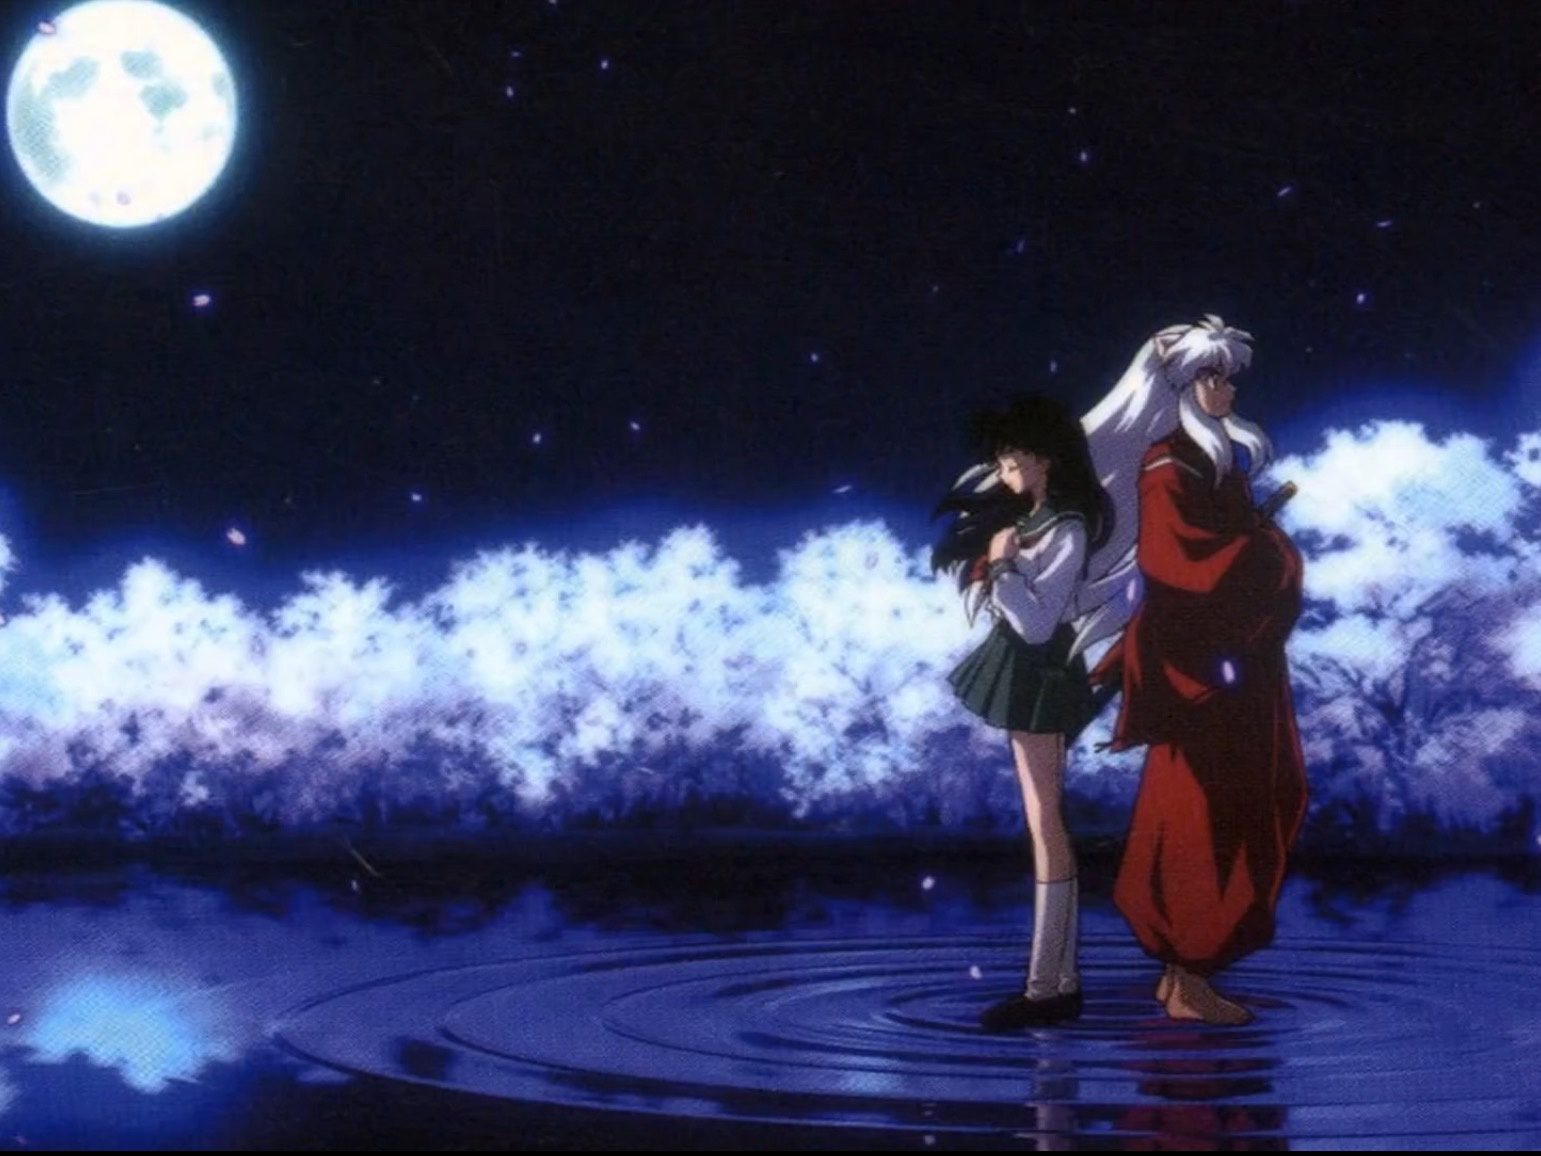 Who Does Inuyasha End Up With